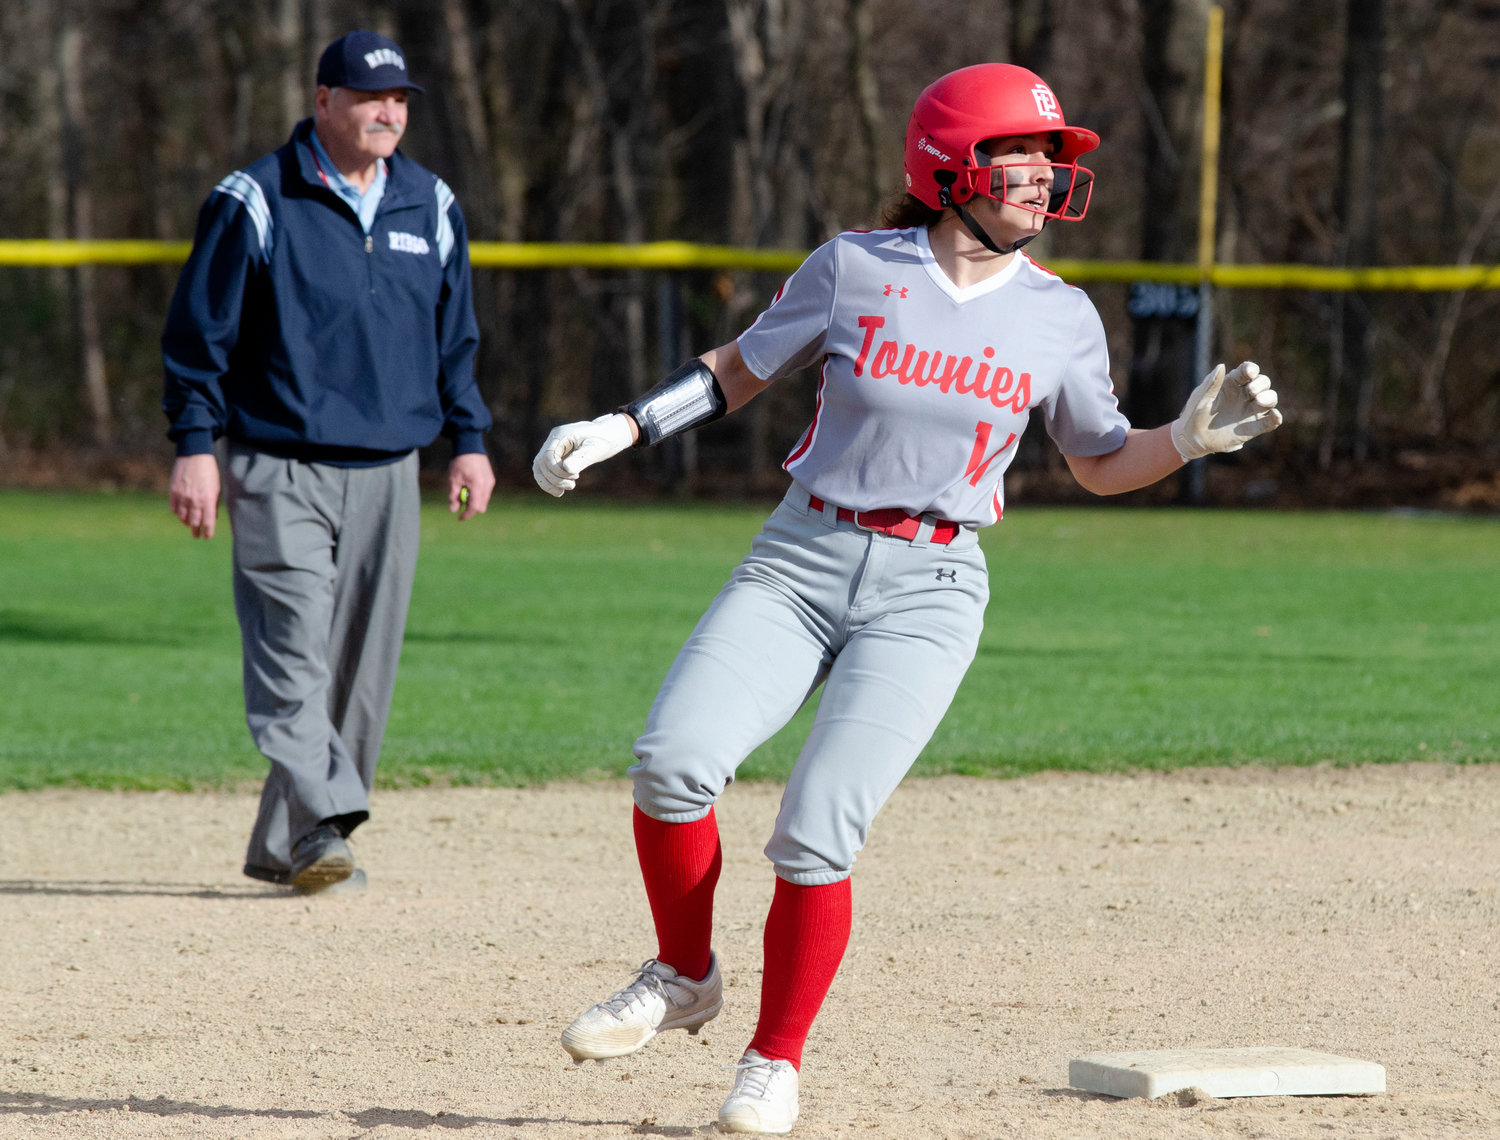 Sophia Patterson puts on the brakes at second base.